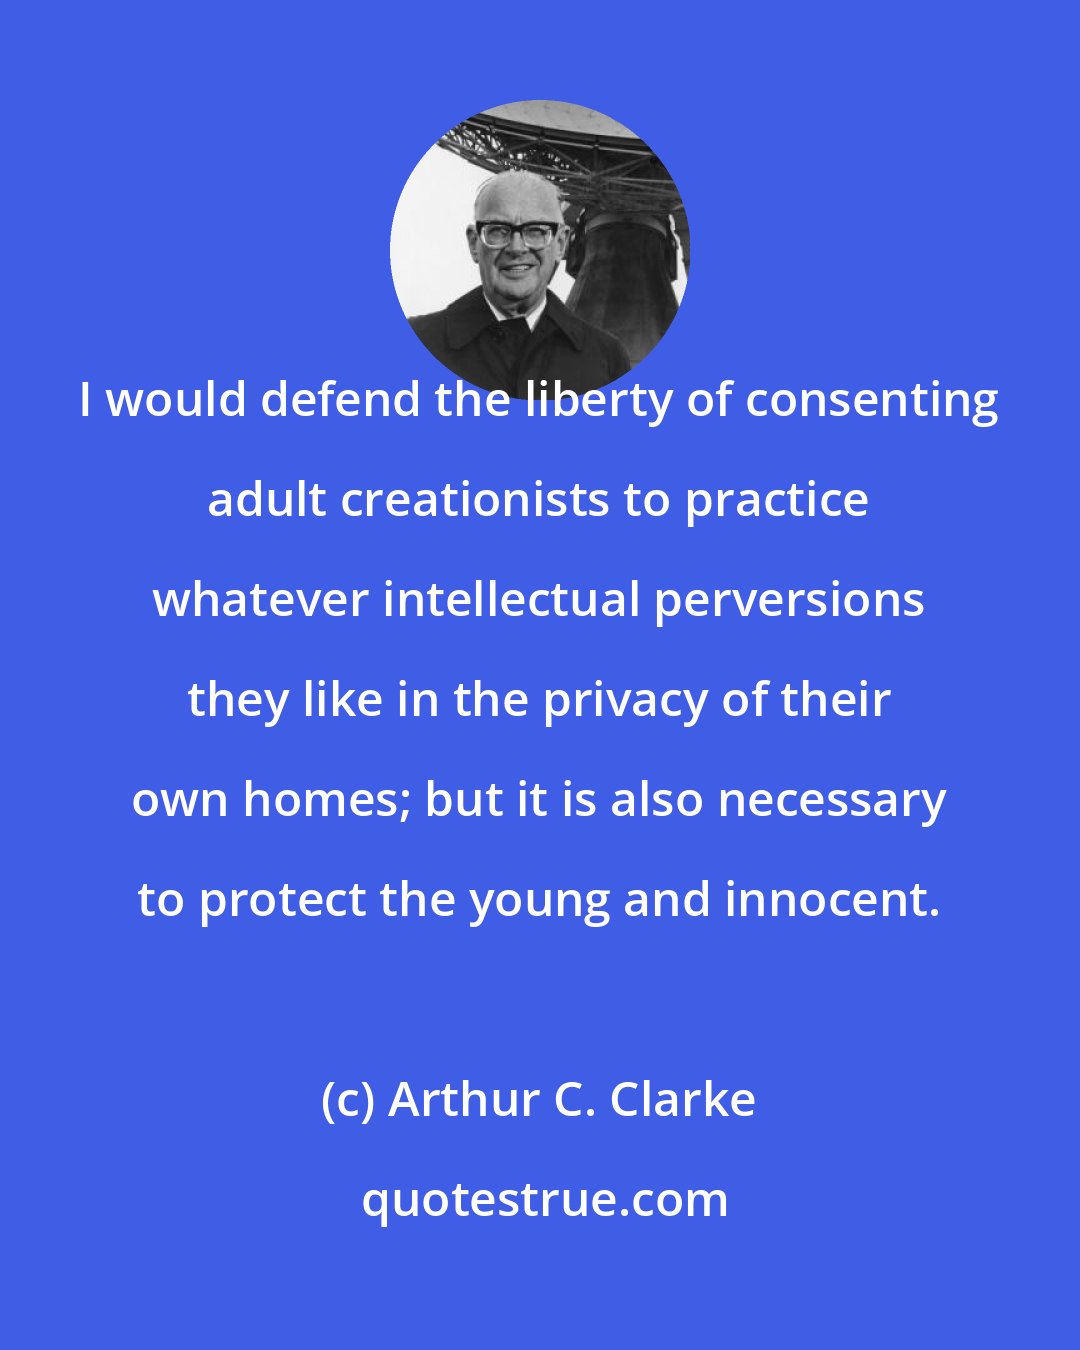 Arthur C. Clarke: I would defend the liberty of consenting adult creationists to practice whatever intellectual perversions they like in the privacy of their own homes; but it is also necessary to protect the young and innocent.